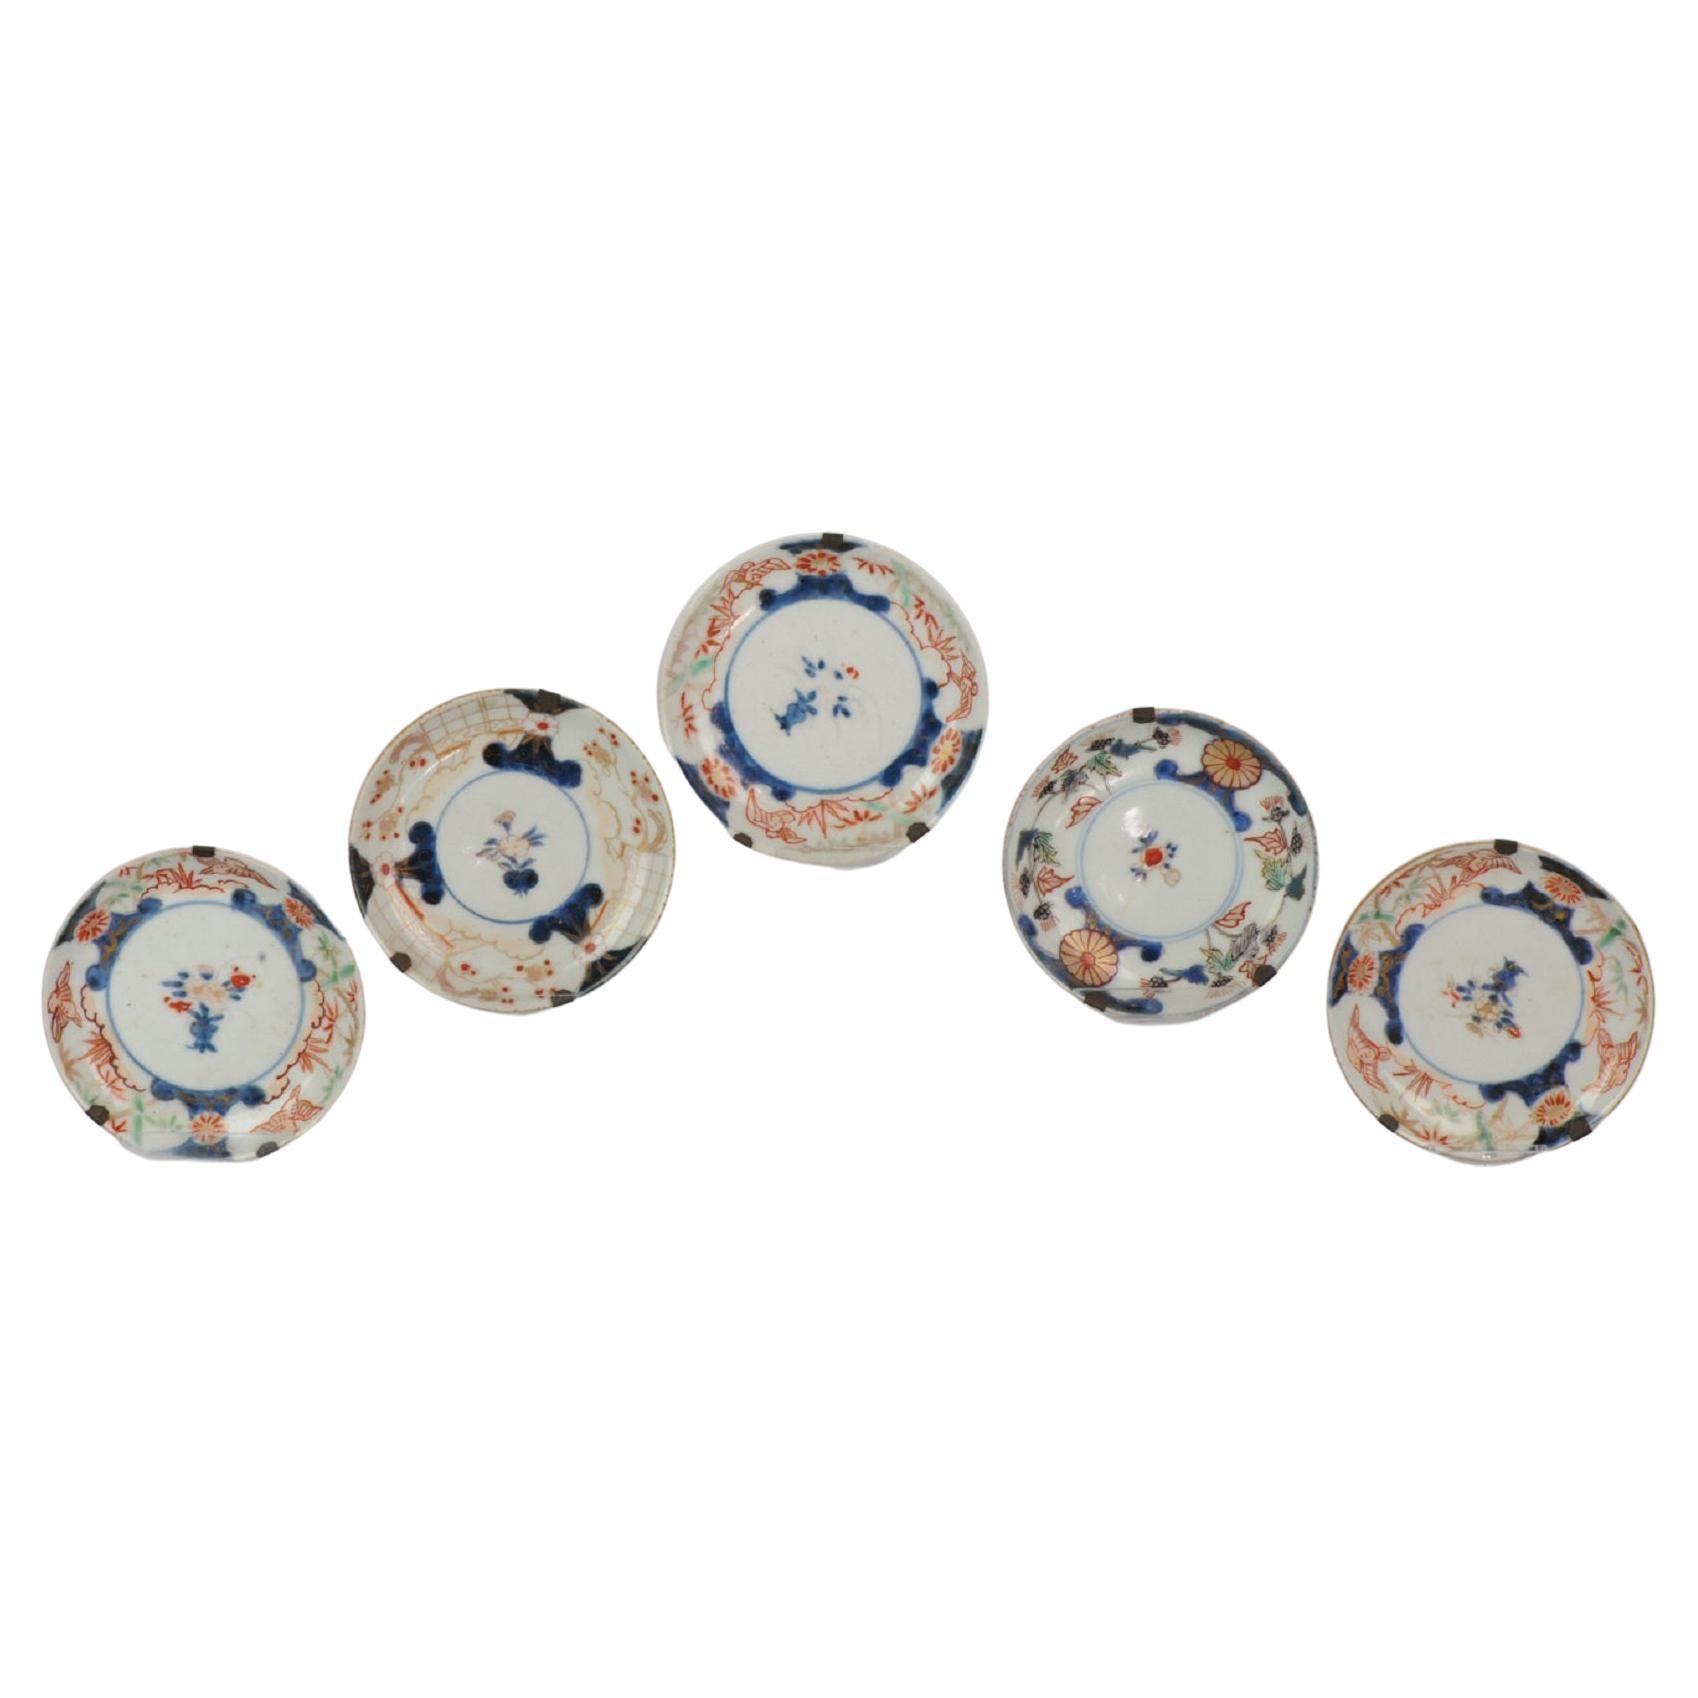 5 Piece Chinese/Japan Porcelain Saucers Imari, 18th Century For Sale